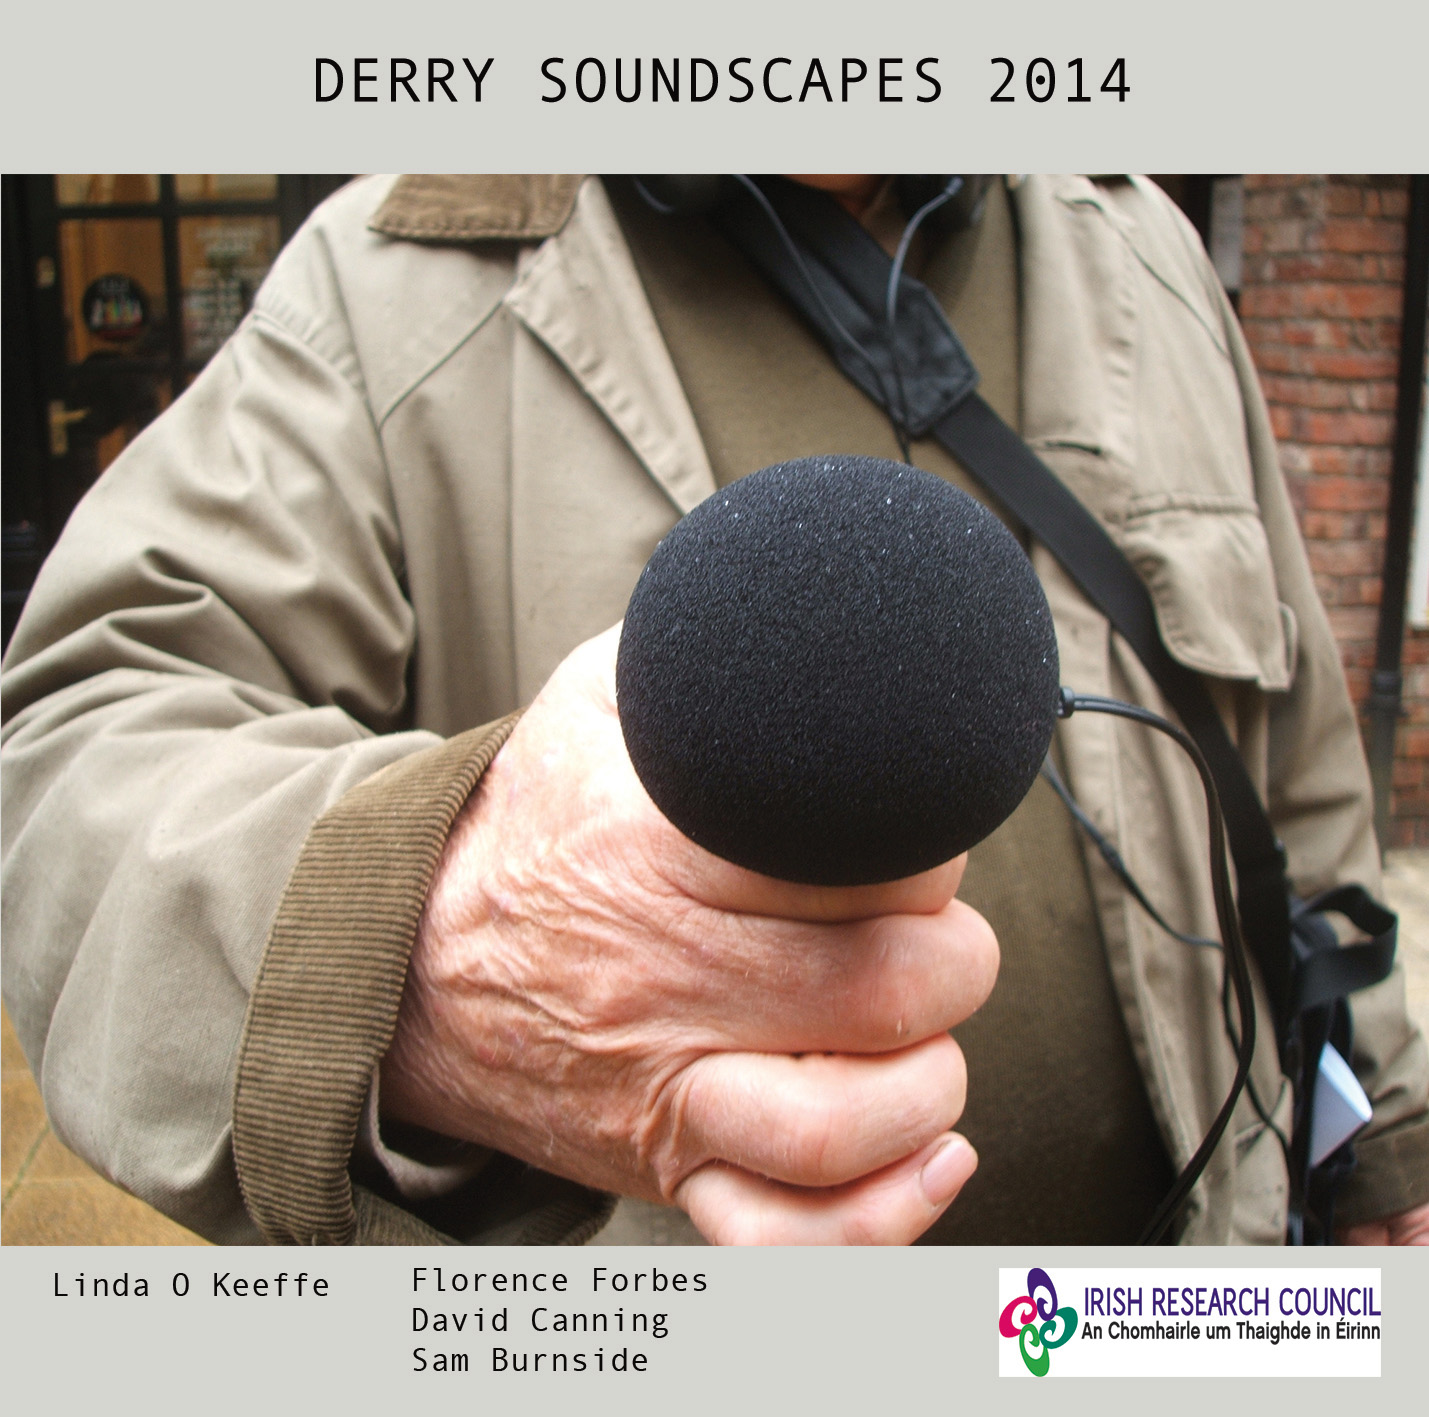 The Derry Soundscapes Project 2014